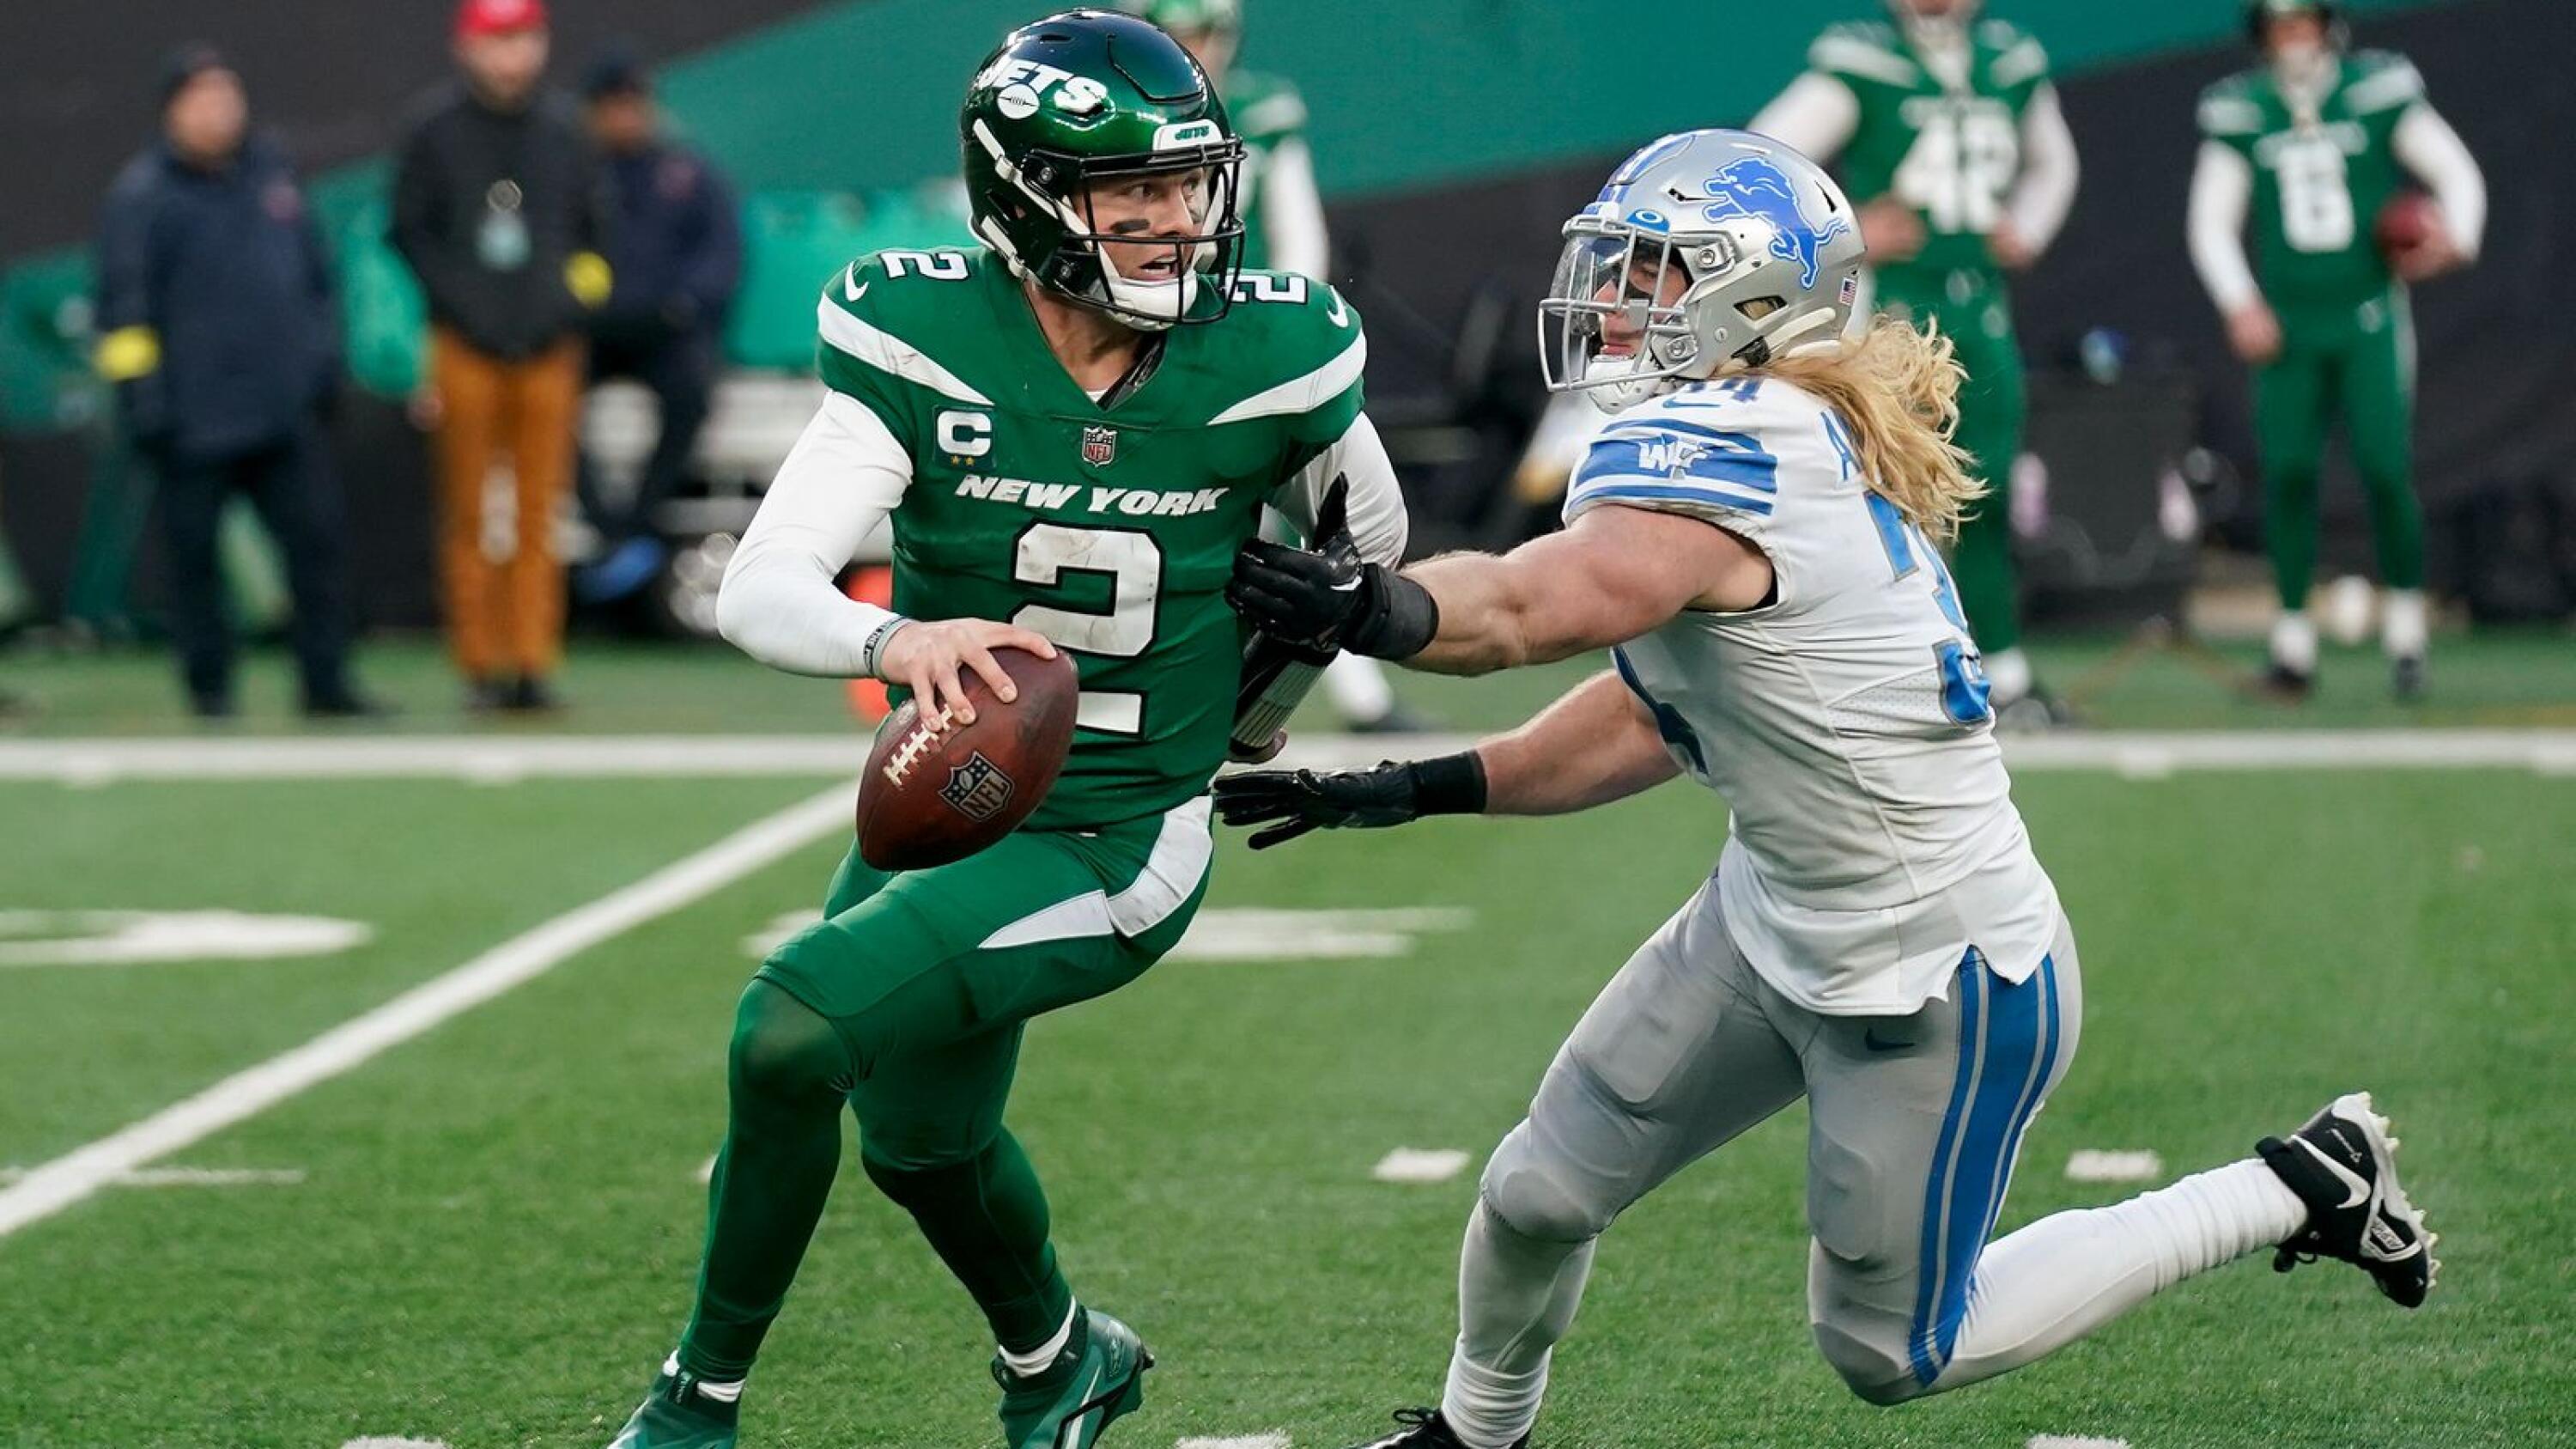 Wilson's up-and-down Jets return ends in disappointment